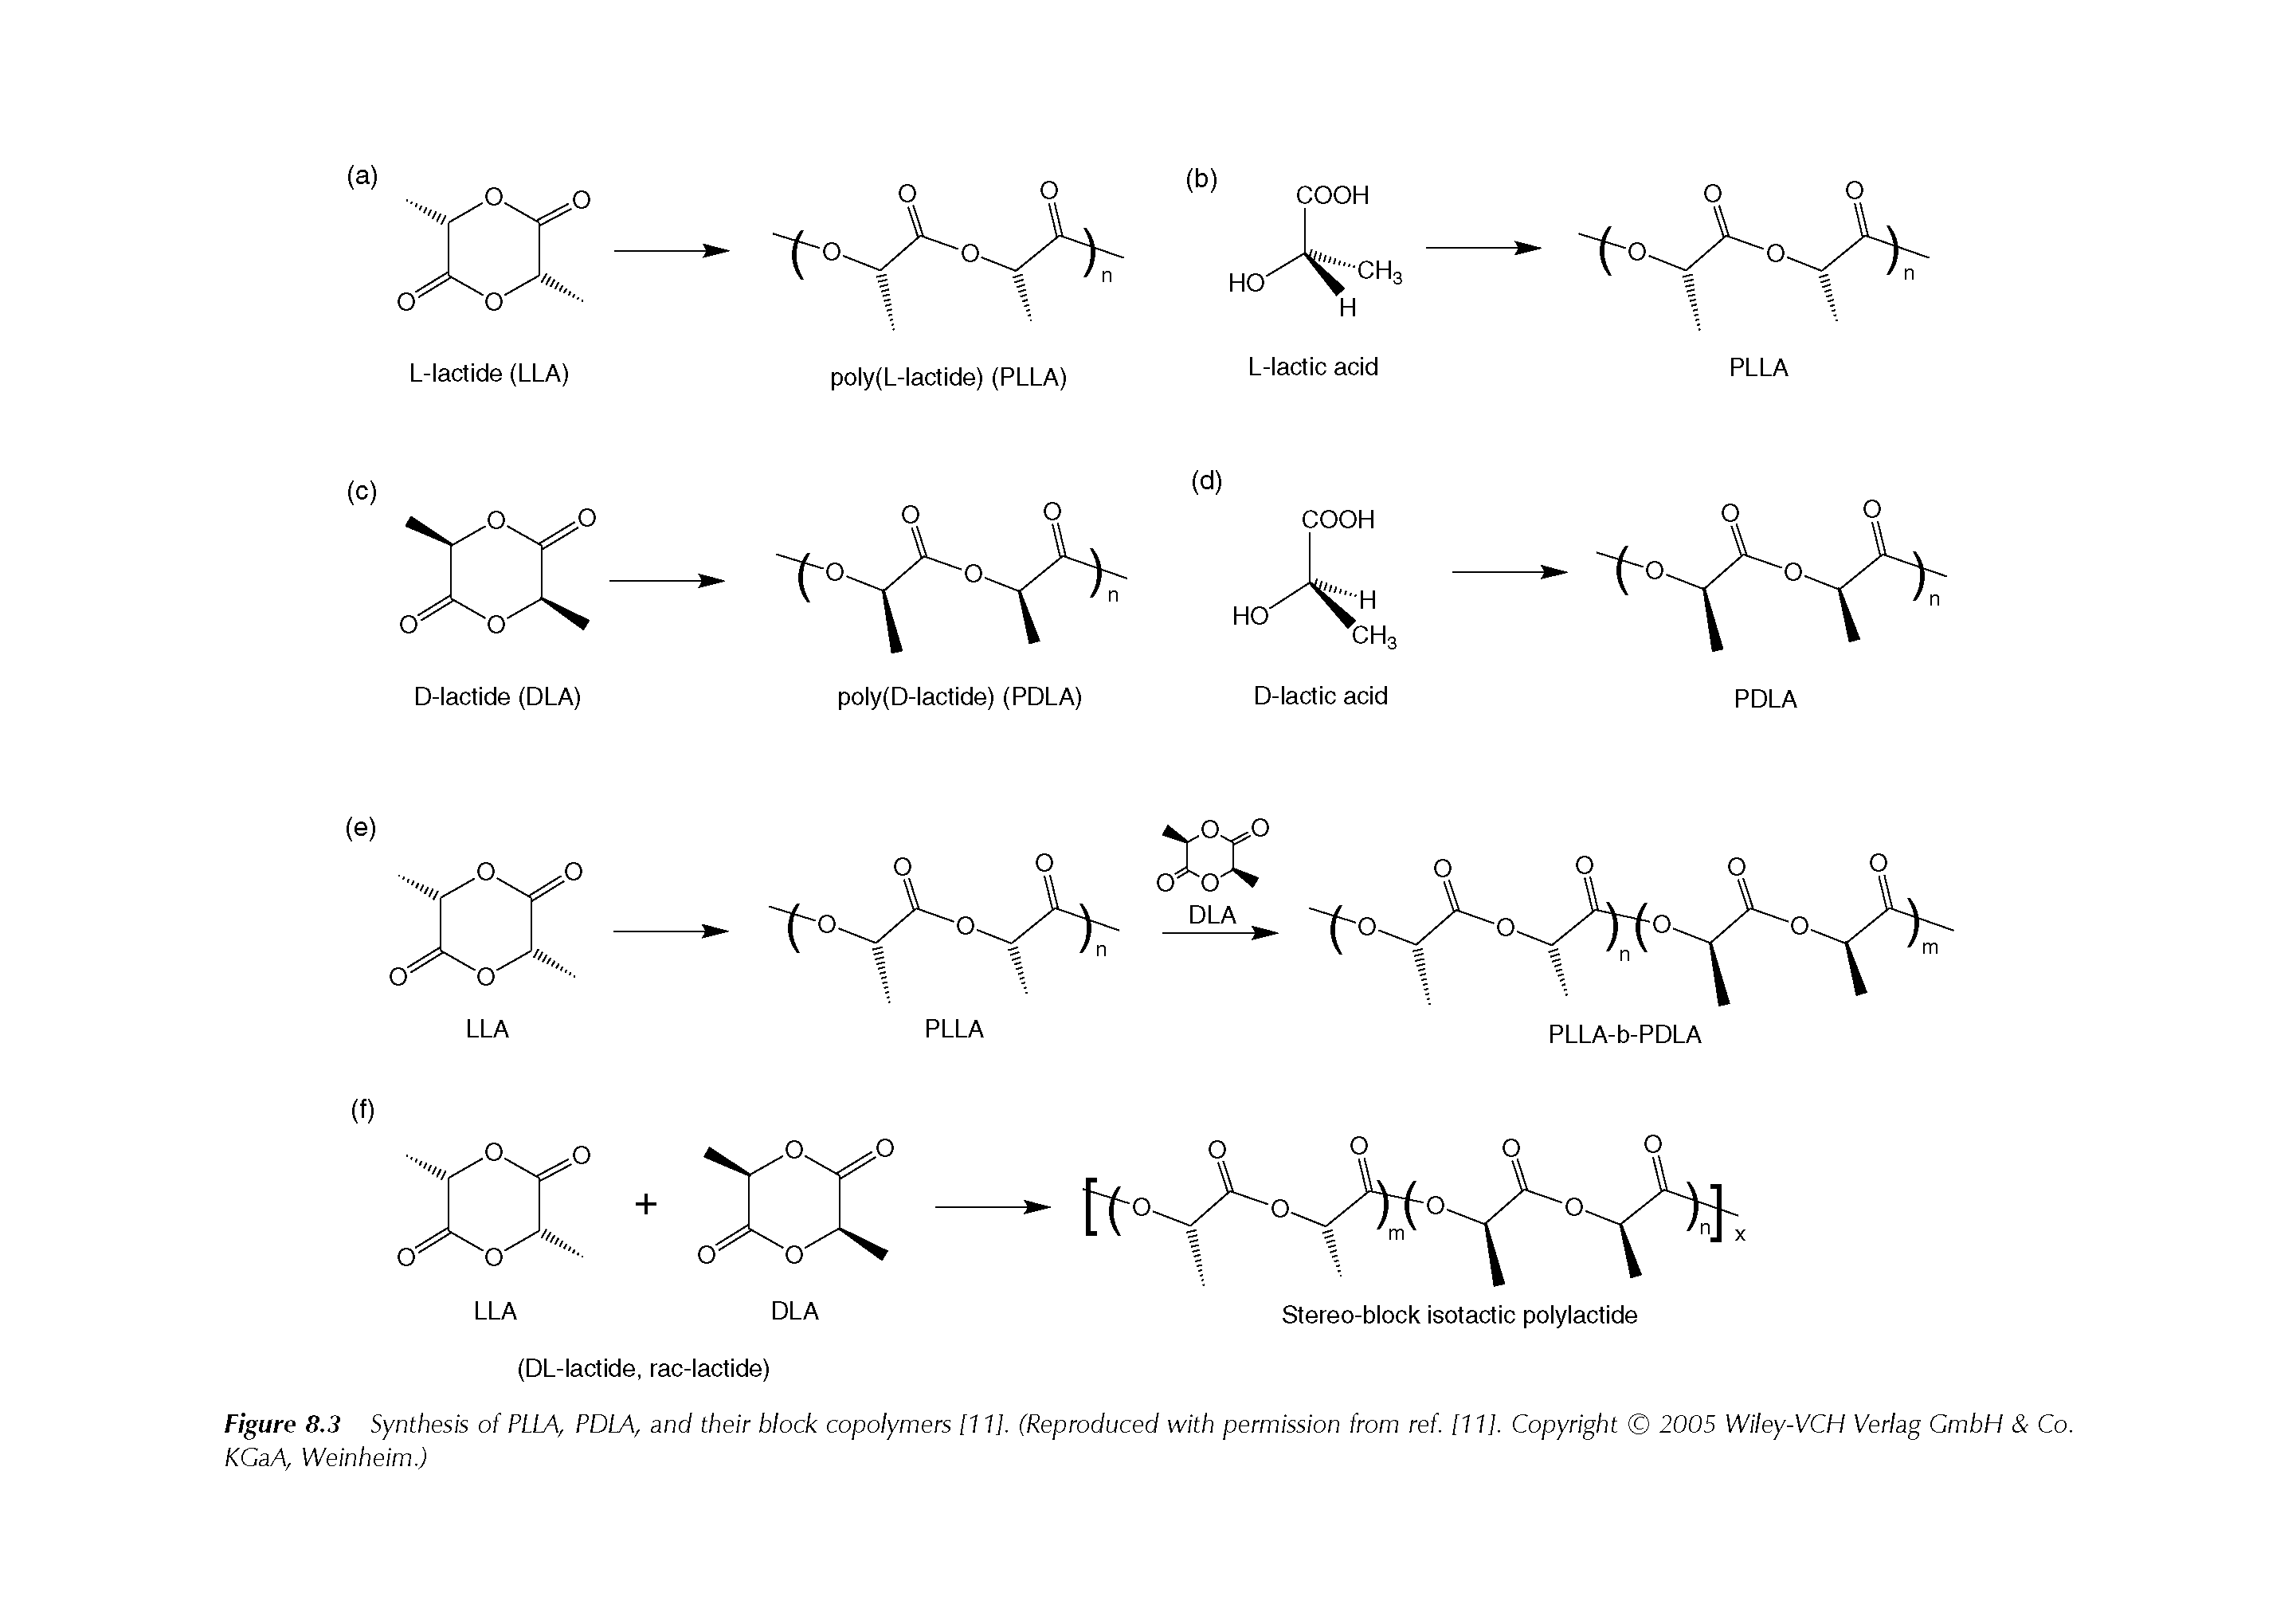 Figure 8.3 Synthesis of PLLA, PDLA, and their biock copoiymers 111], (Reproduced with permission from ref. 111], Copyright 2005 Wiiey-VCH Veriag GmbH Co. KGaA, Weinheim.)...